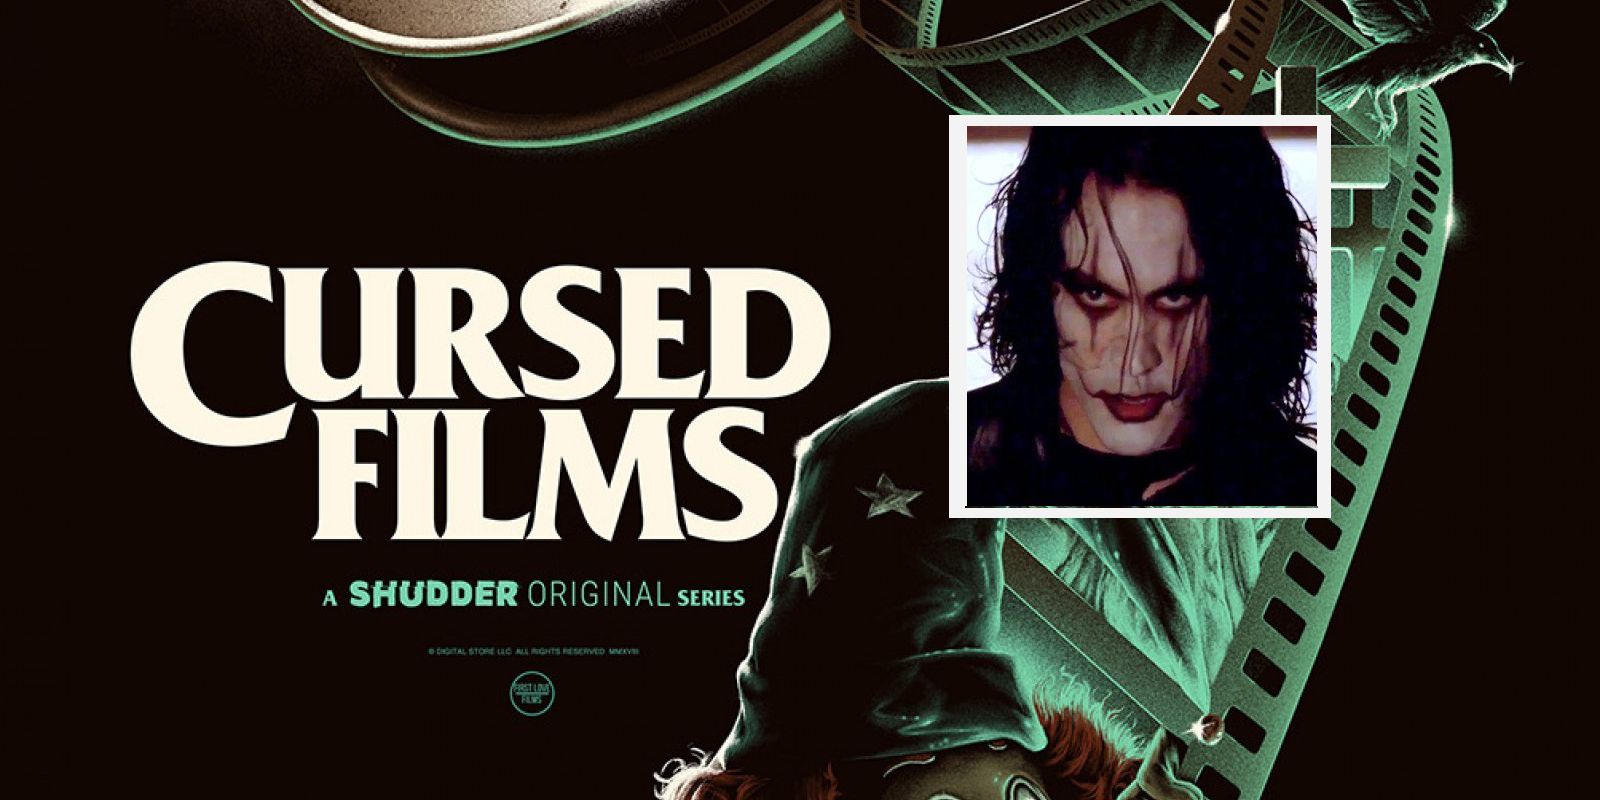 Cursed Films on The Crow.